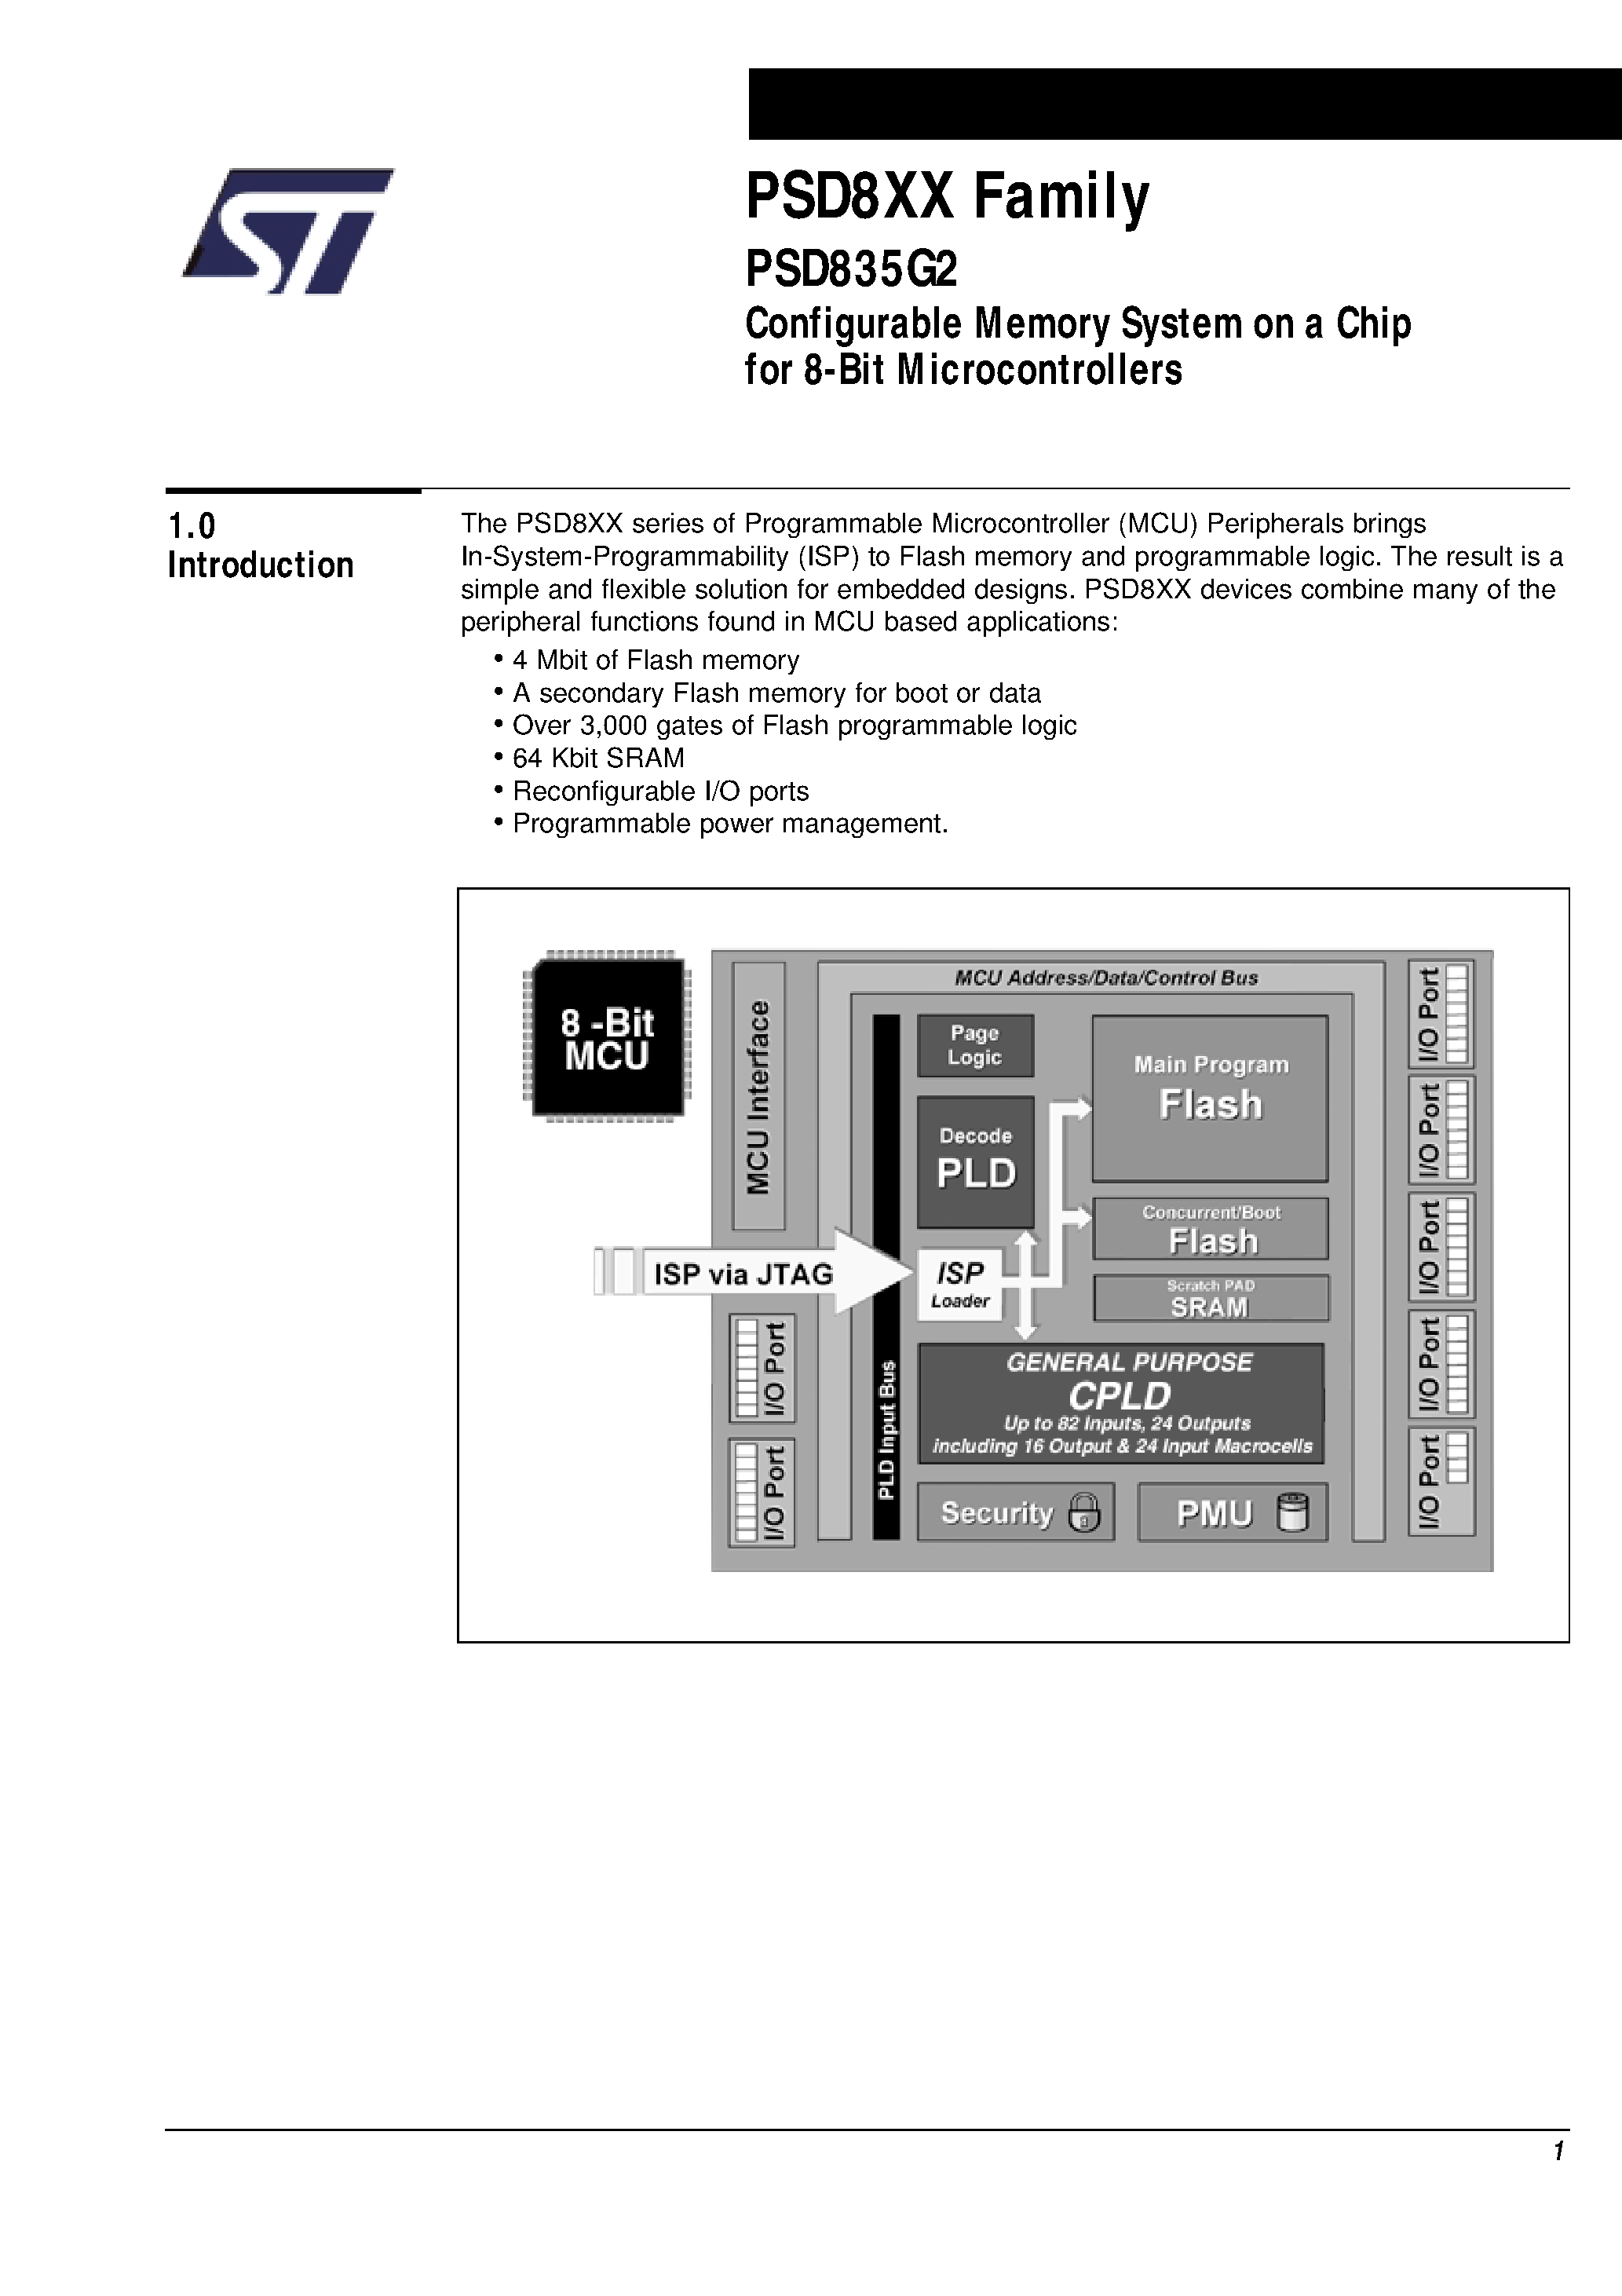 Datasheet PSD835F2-A-70UI - Configurable Memory System on a Chip for 8-Bit Microcontrollers page 2